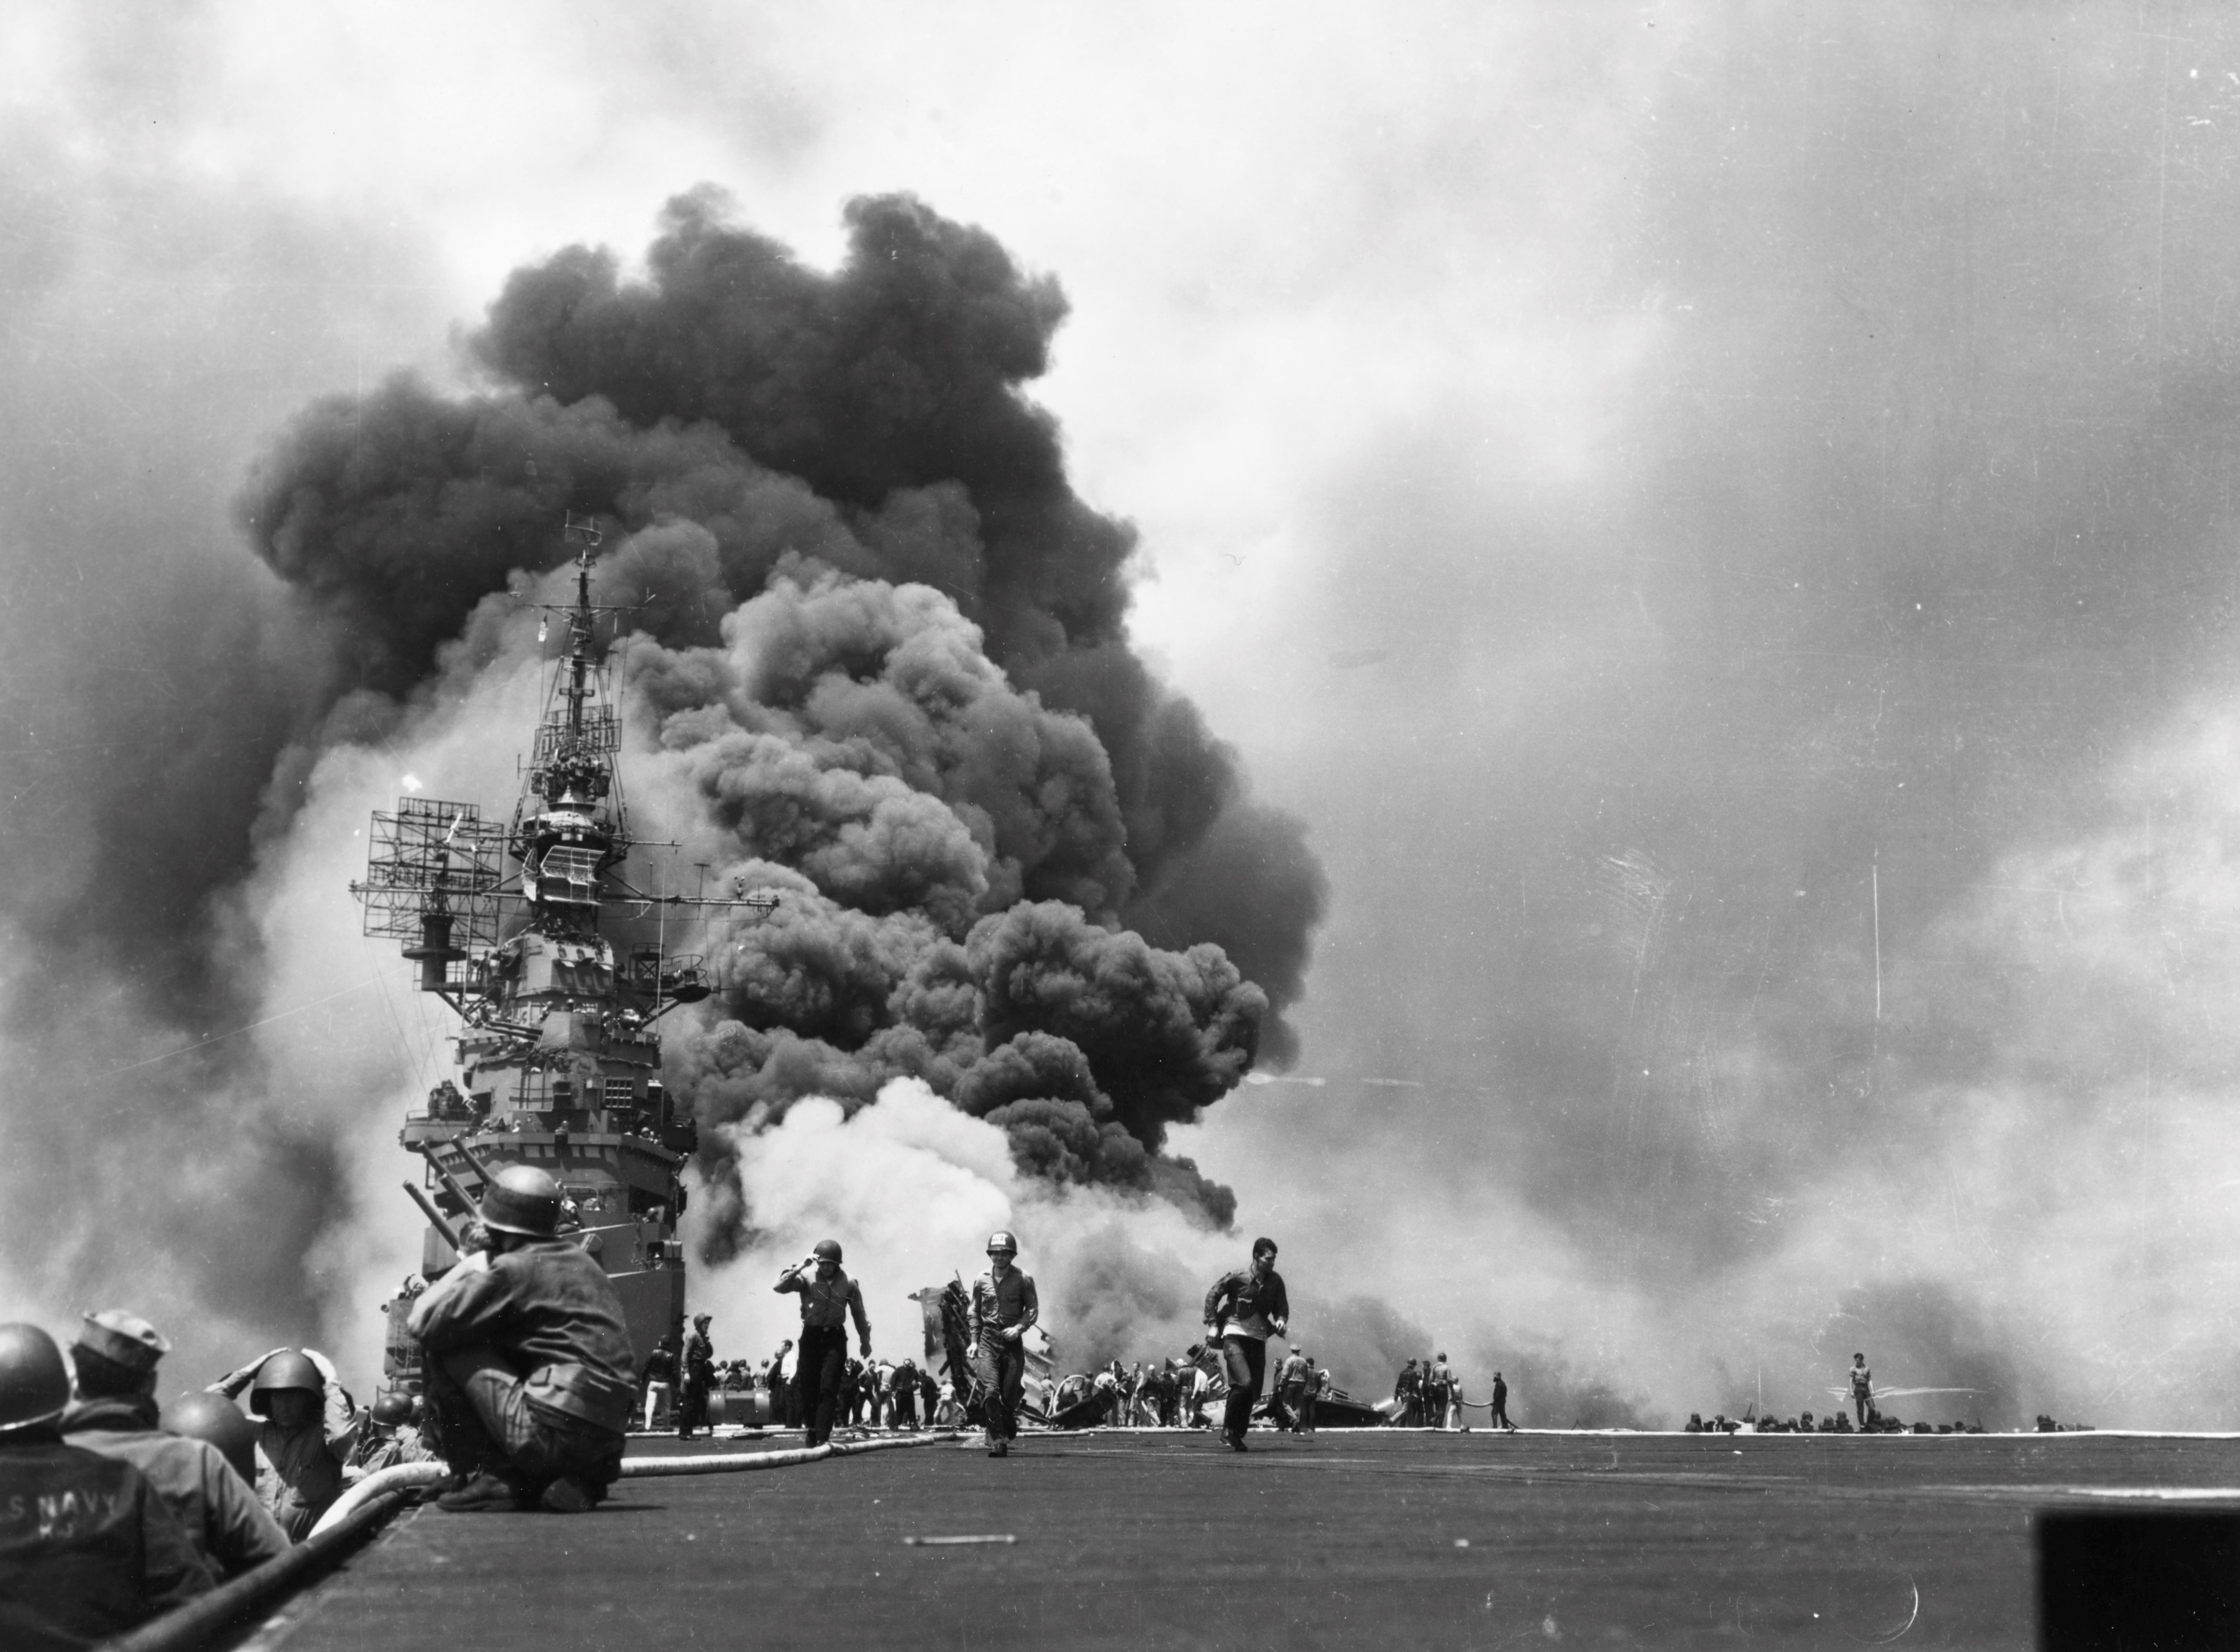 Carrier USS Bunker Hill burning after the second special attack off Okinawa, Japan, 11 May 1945